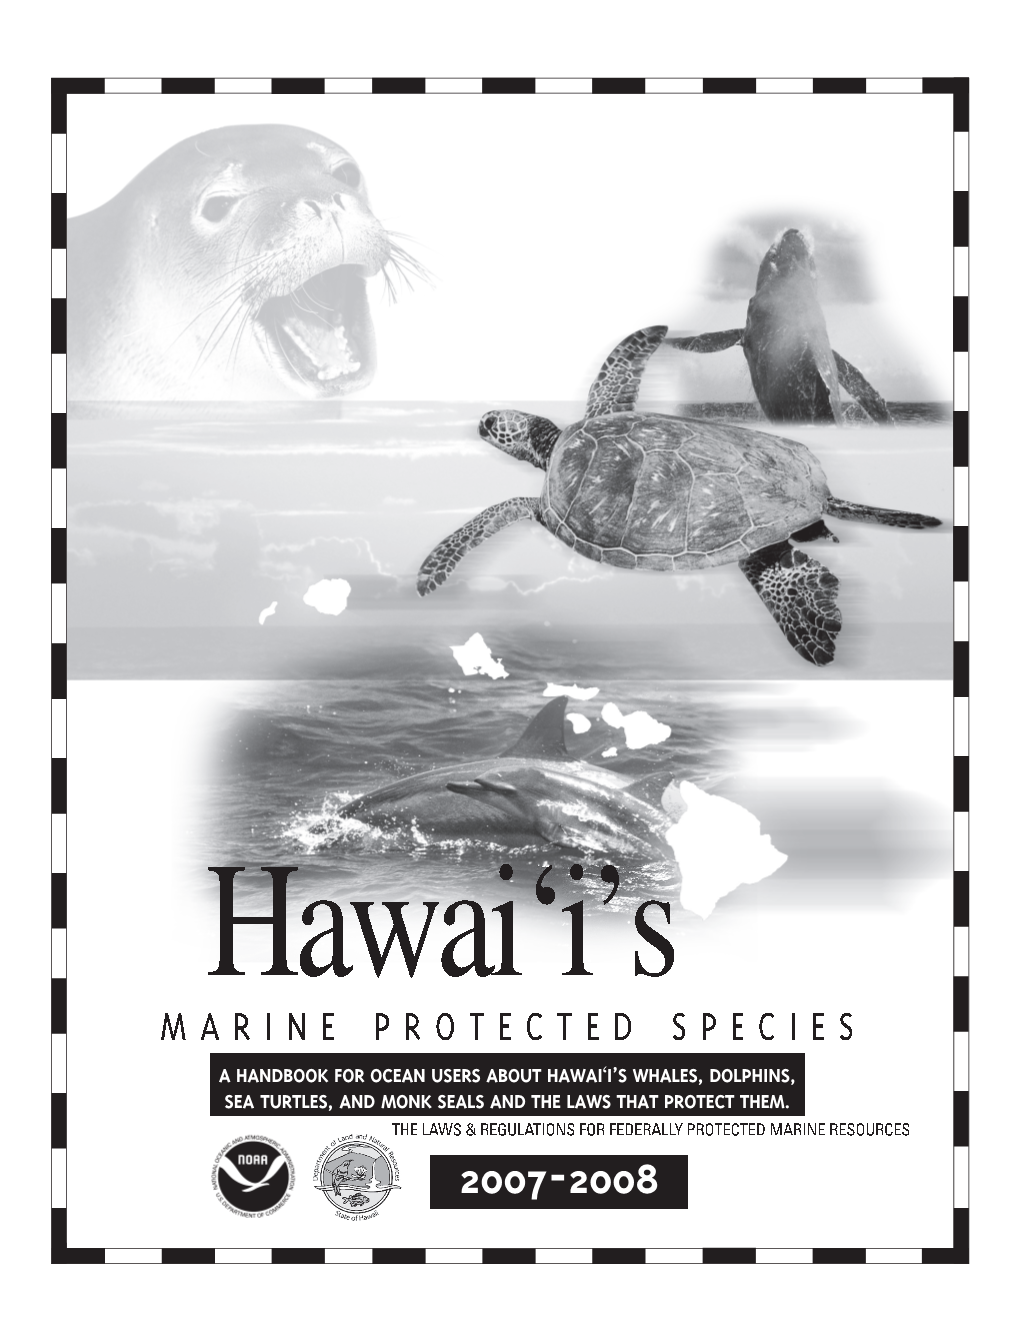 A Handbook for Ocean Users About Hawai'i's Whales